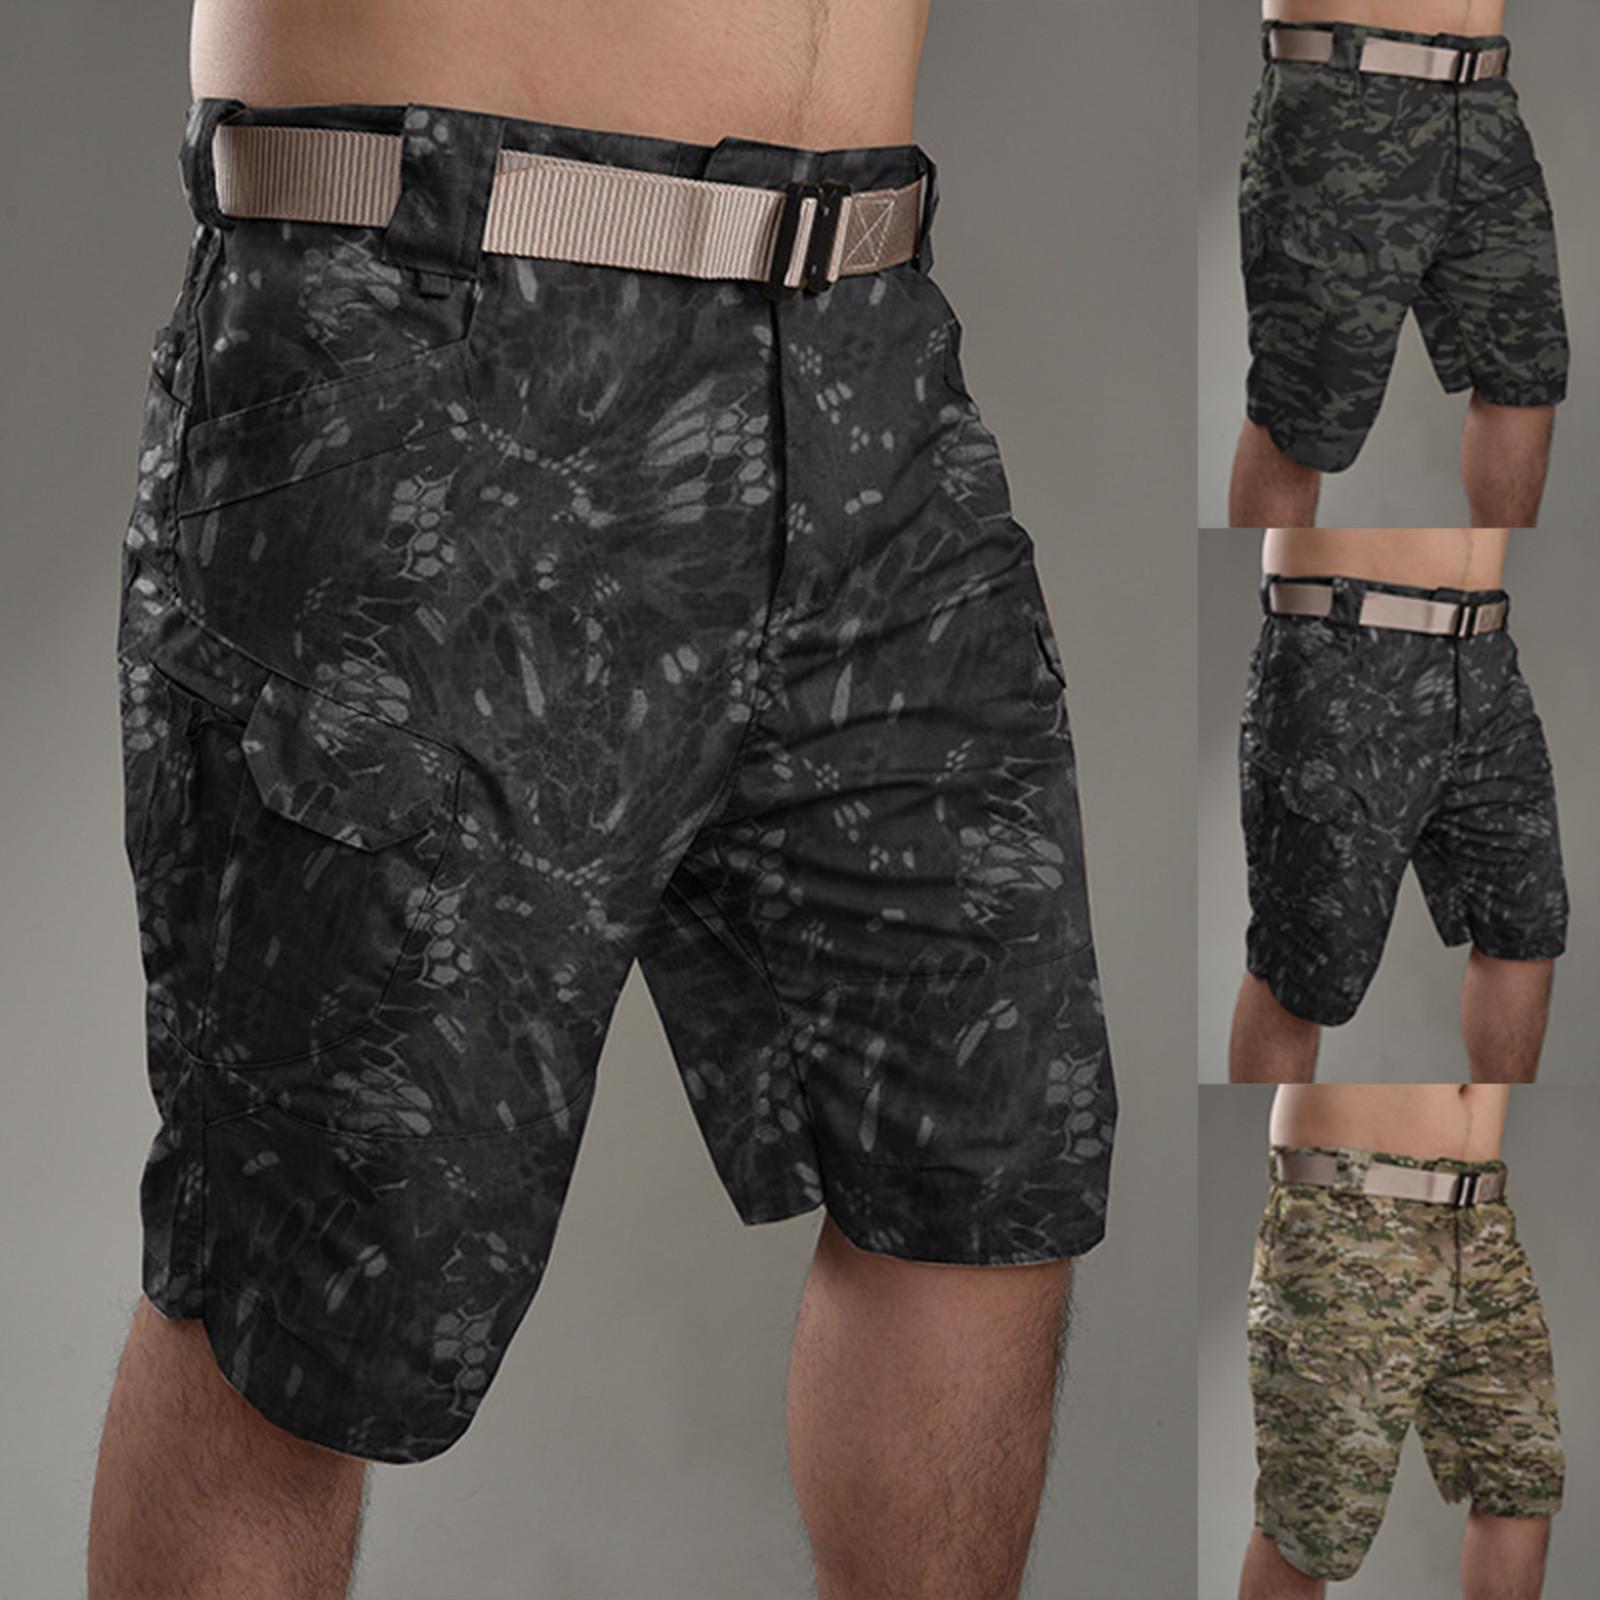 Newstar Men's Summer Outdoors Casual  Multi-pocket Camouflage Overalls Plus Size Sport Shorts Pants